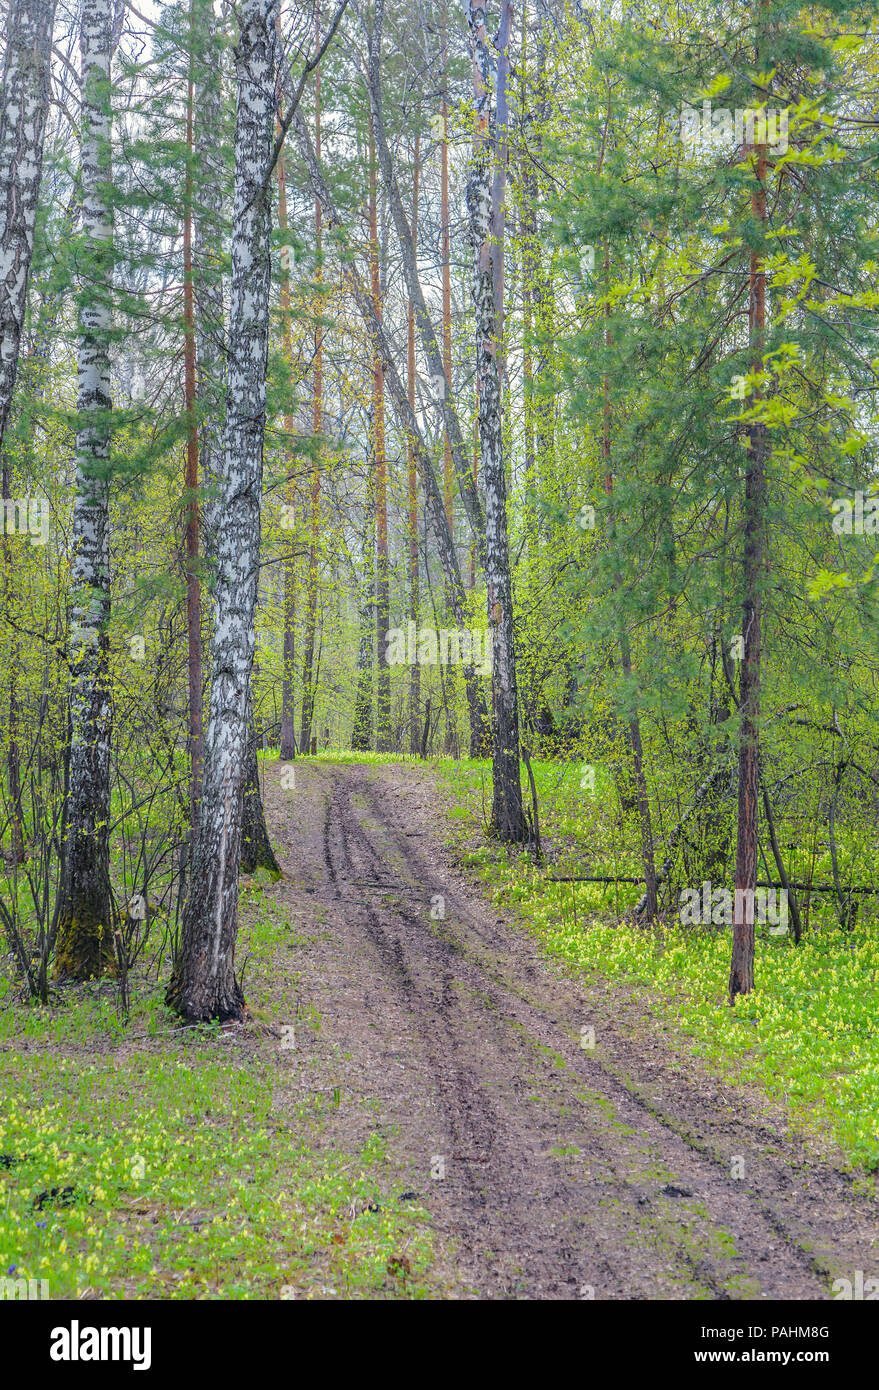 The first spring flowers in the Siberian forest. Stock Photo